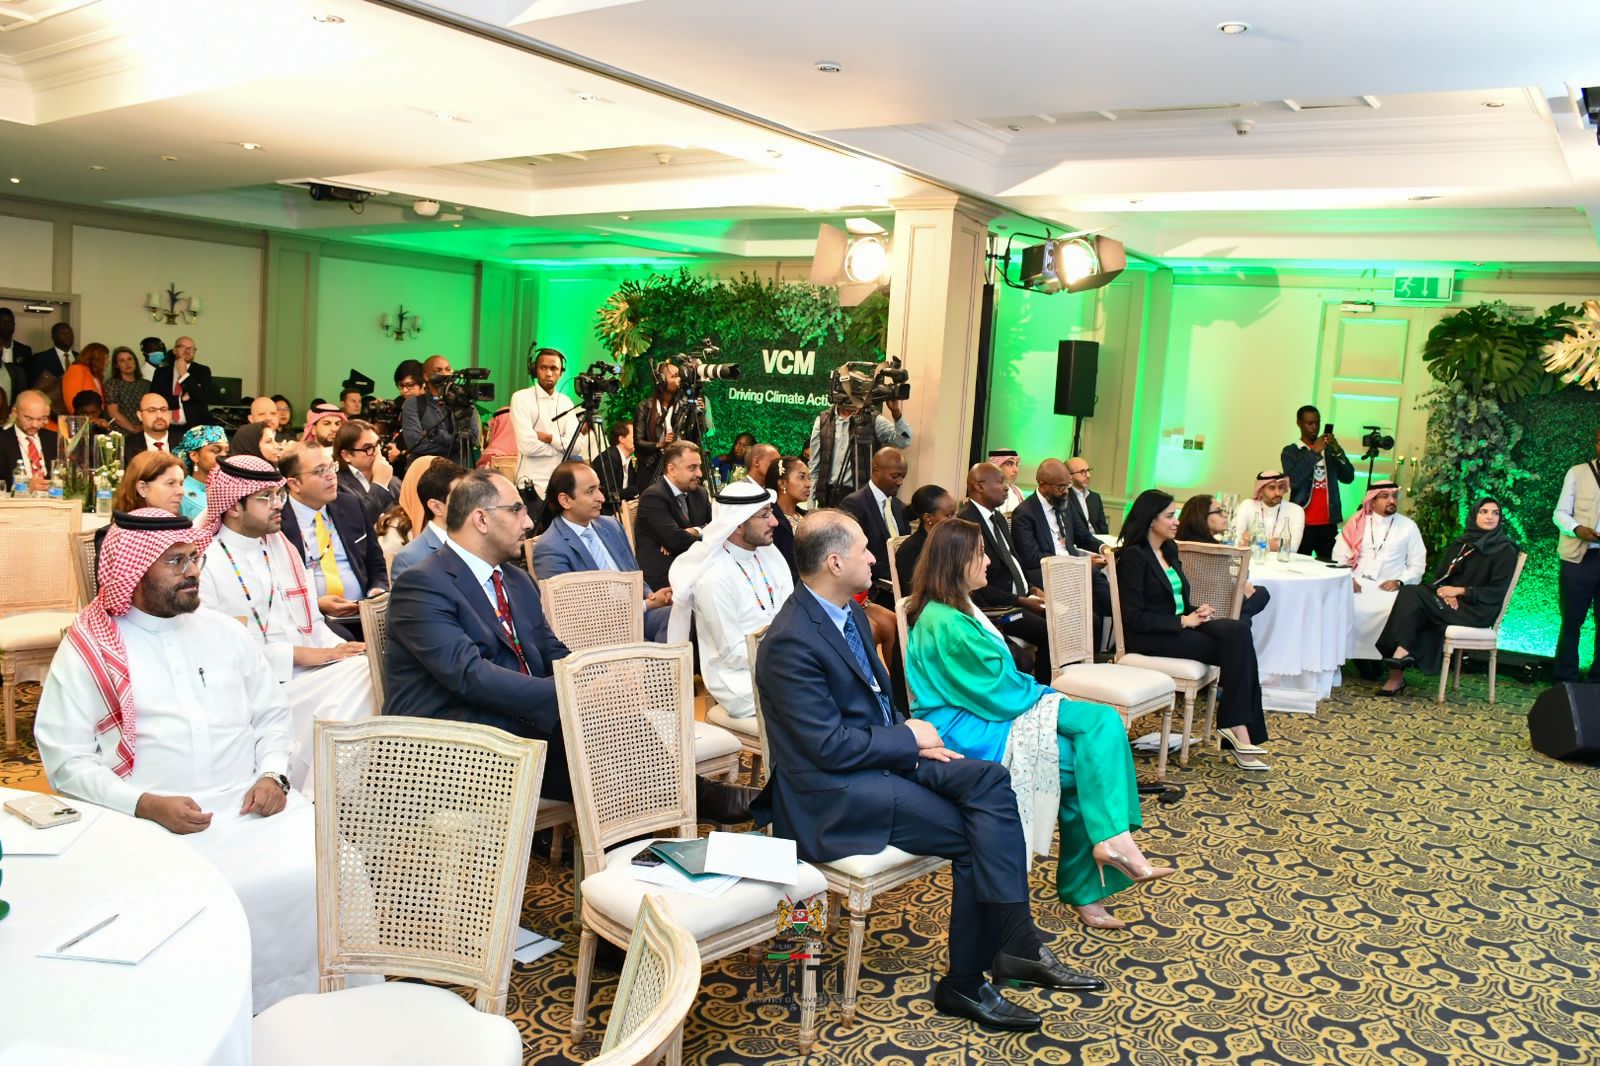 Launch of World's Largest Voluntary Carbon Market and Kenya's Leadership in Climate Action